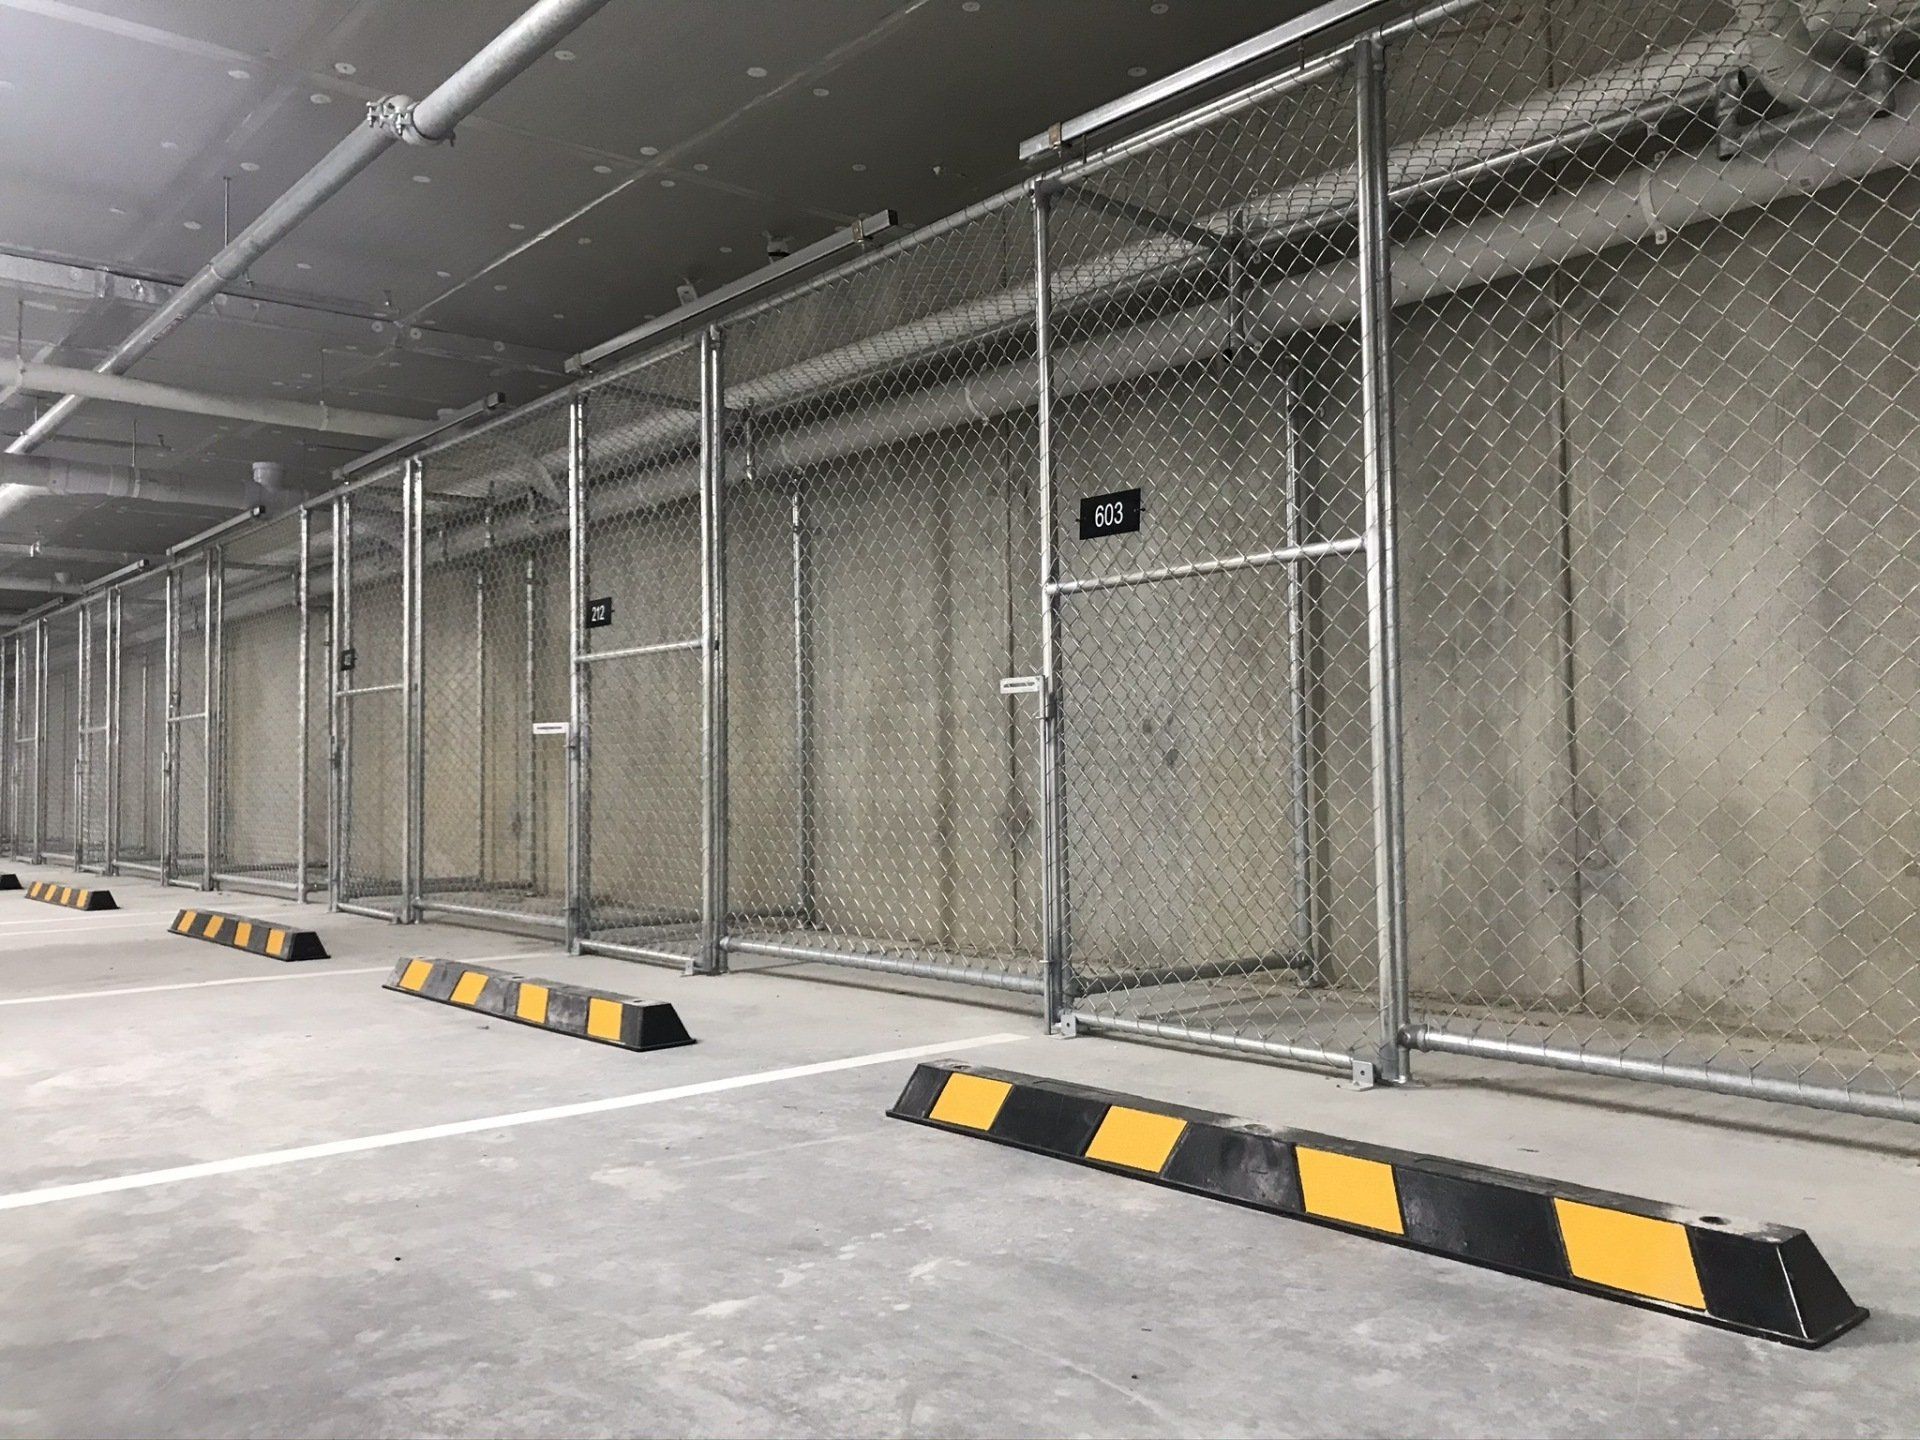 Row of chain mesh storage cages with sliding gates